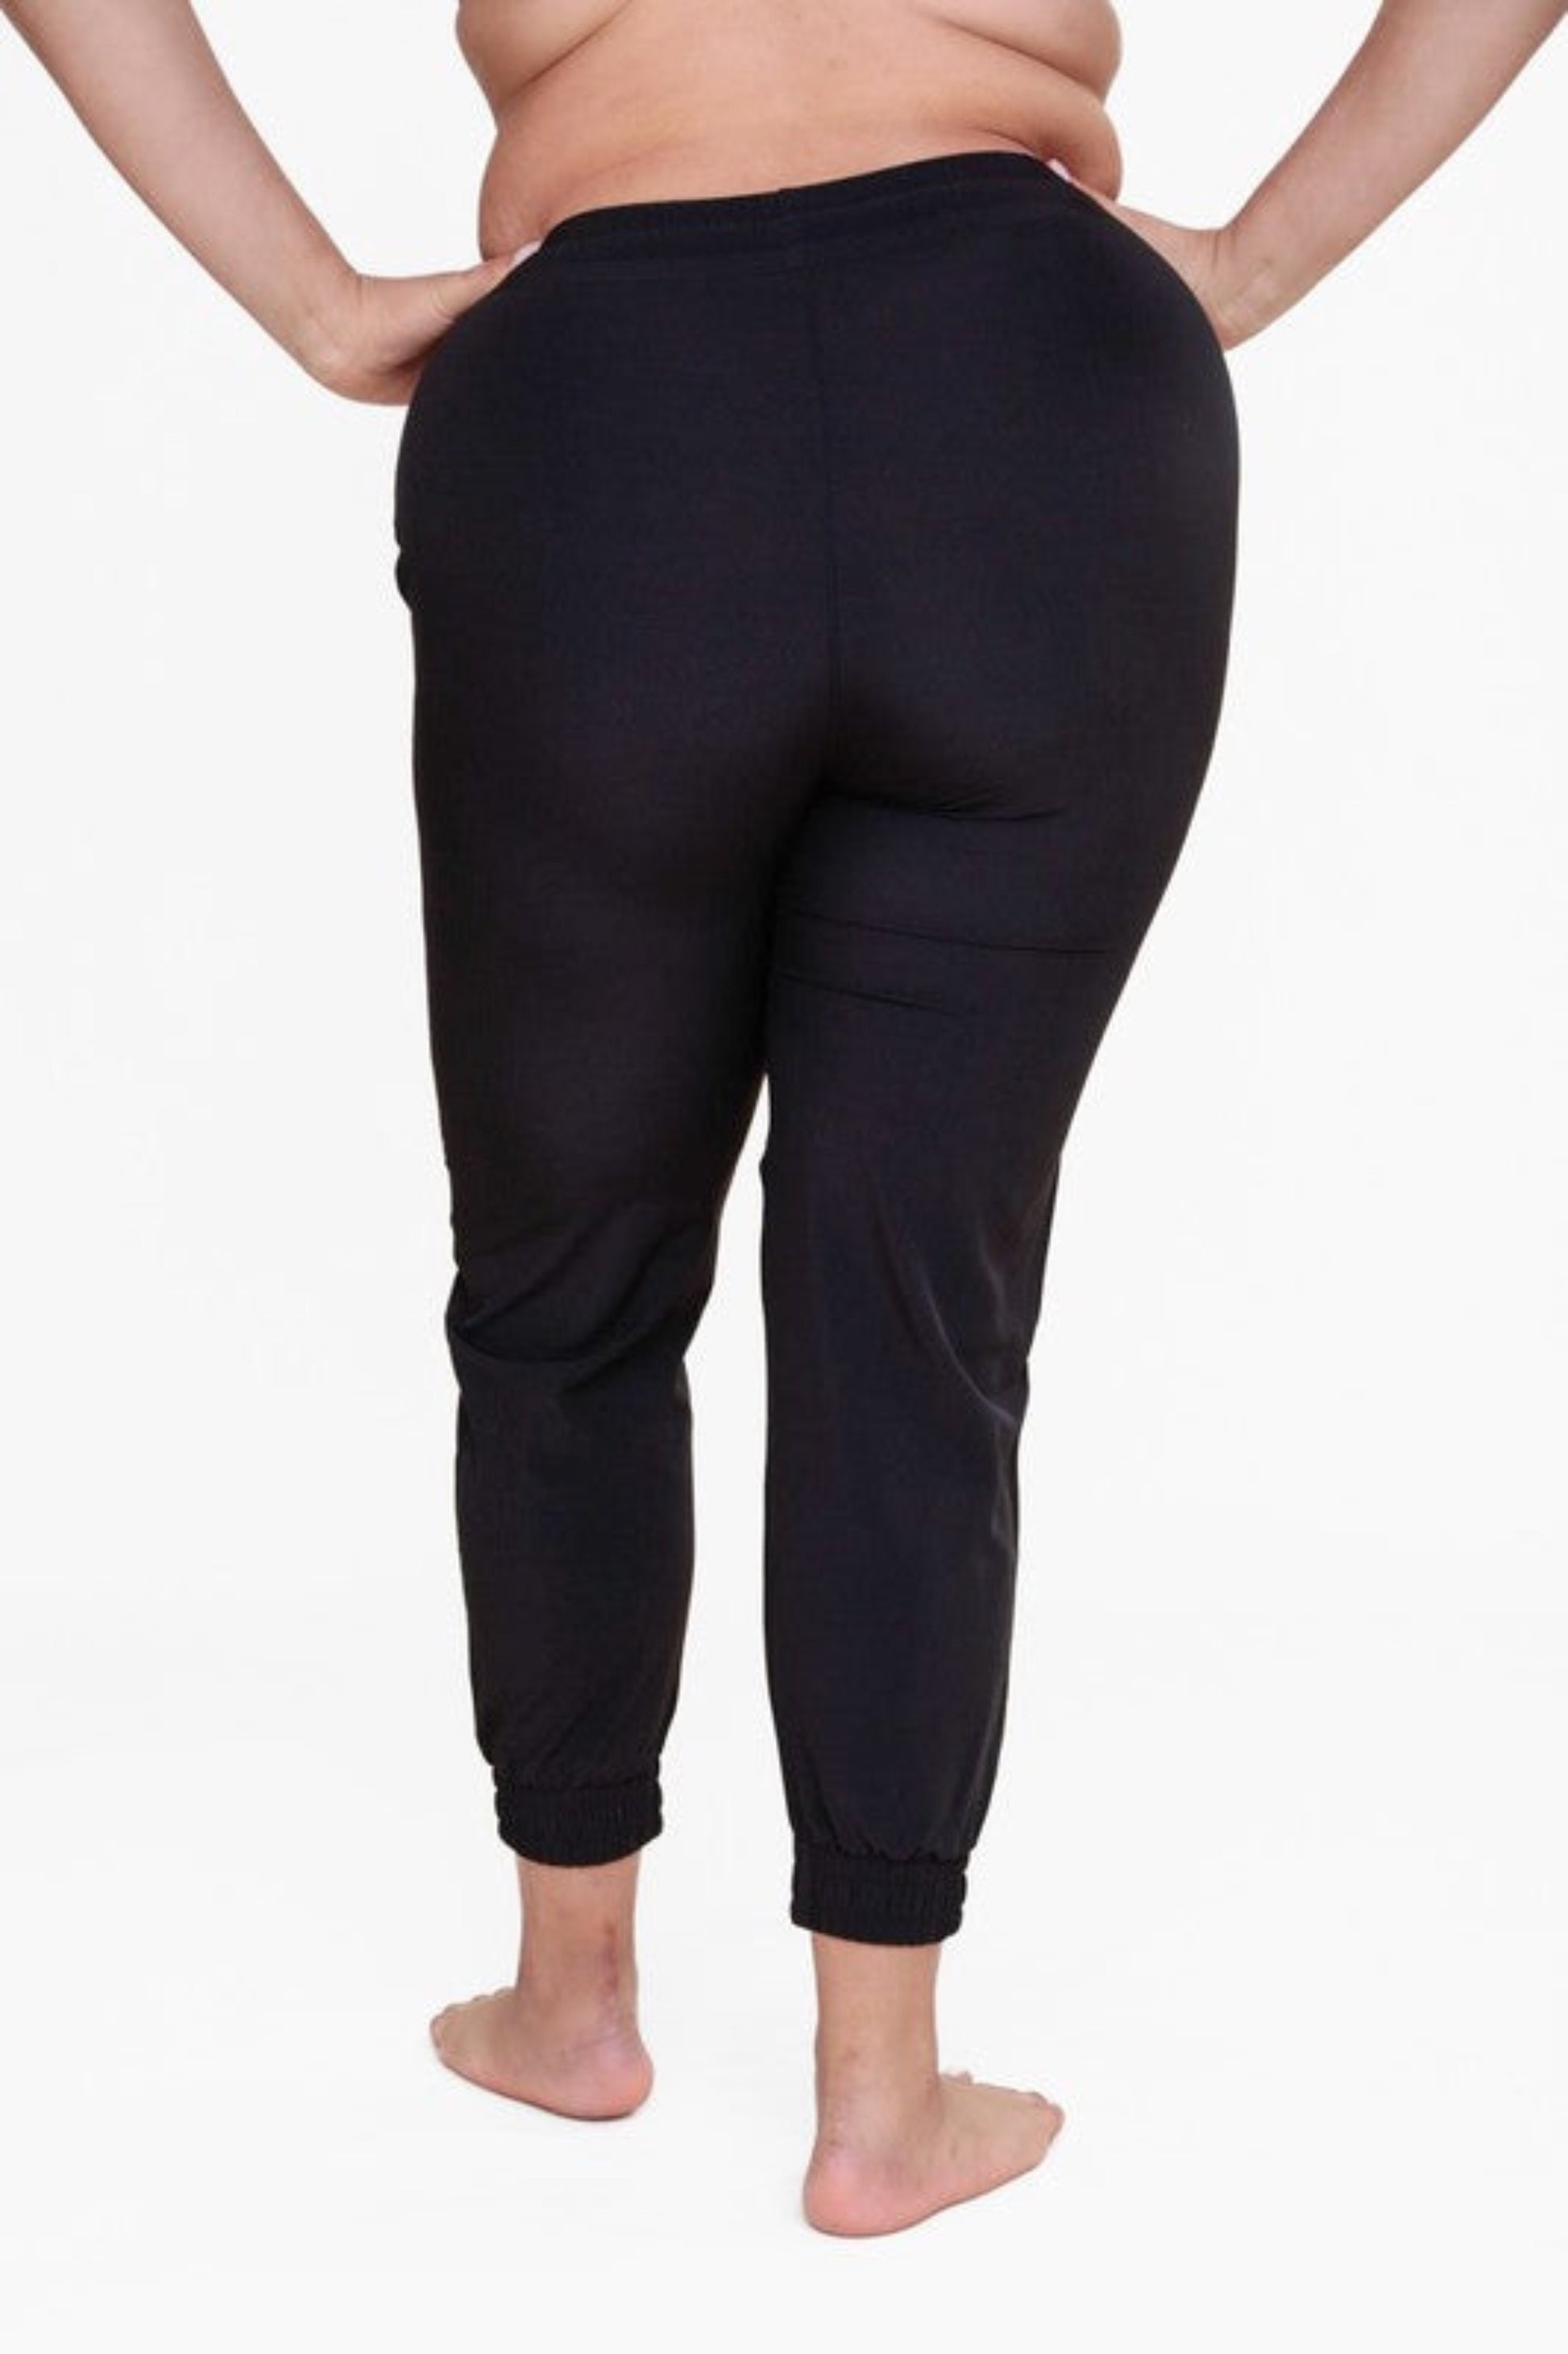 plus size joggers in black. perfect for the gym or lounging around the house. 